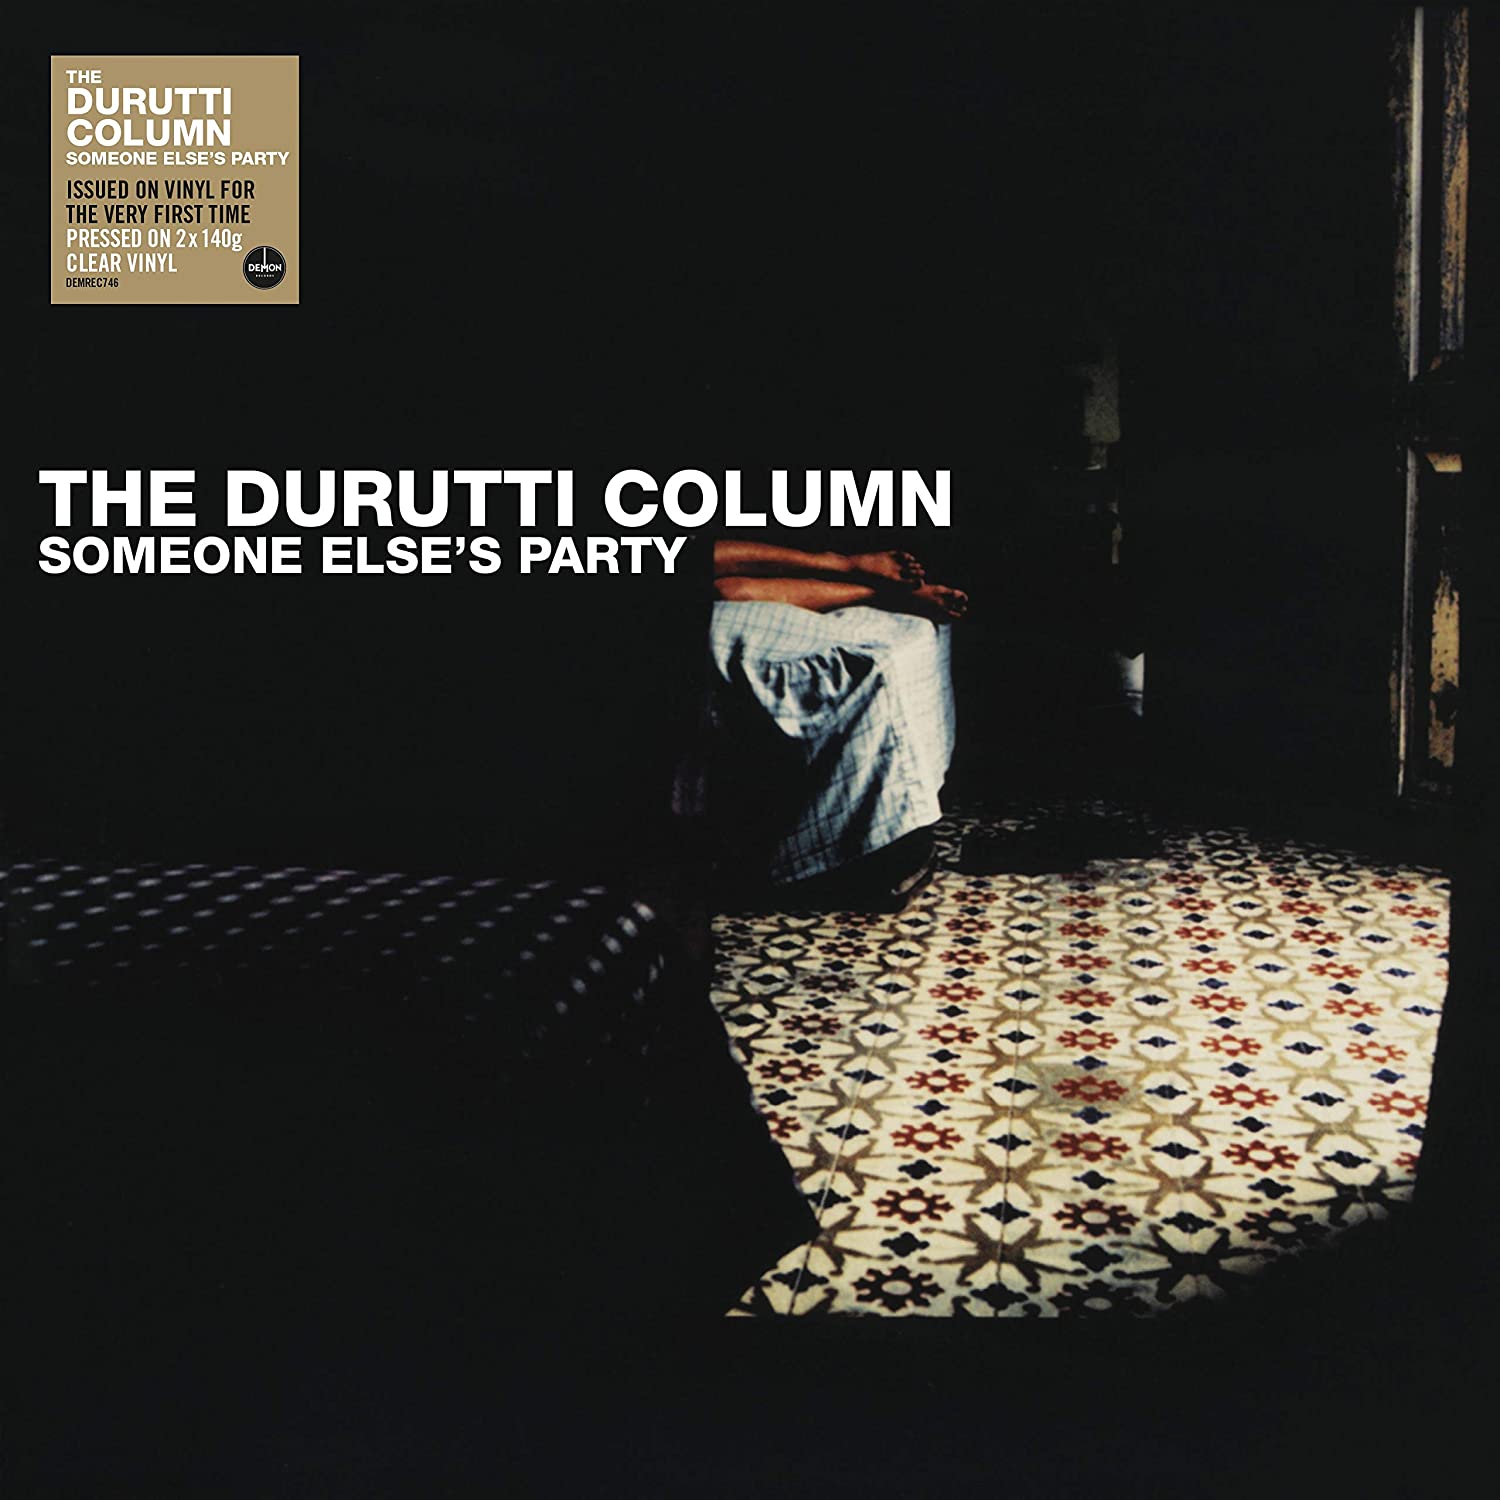 THE DURUTTI COLUMN - Someone Else's Party - 2LP - Limited Clear 140g Vinyl